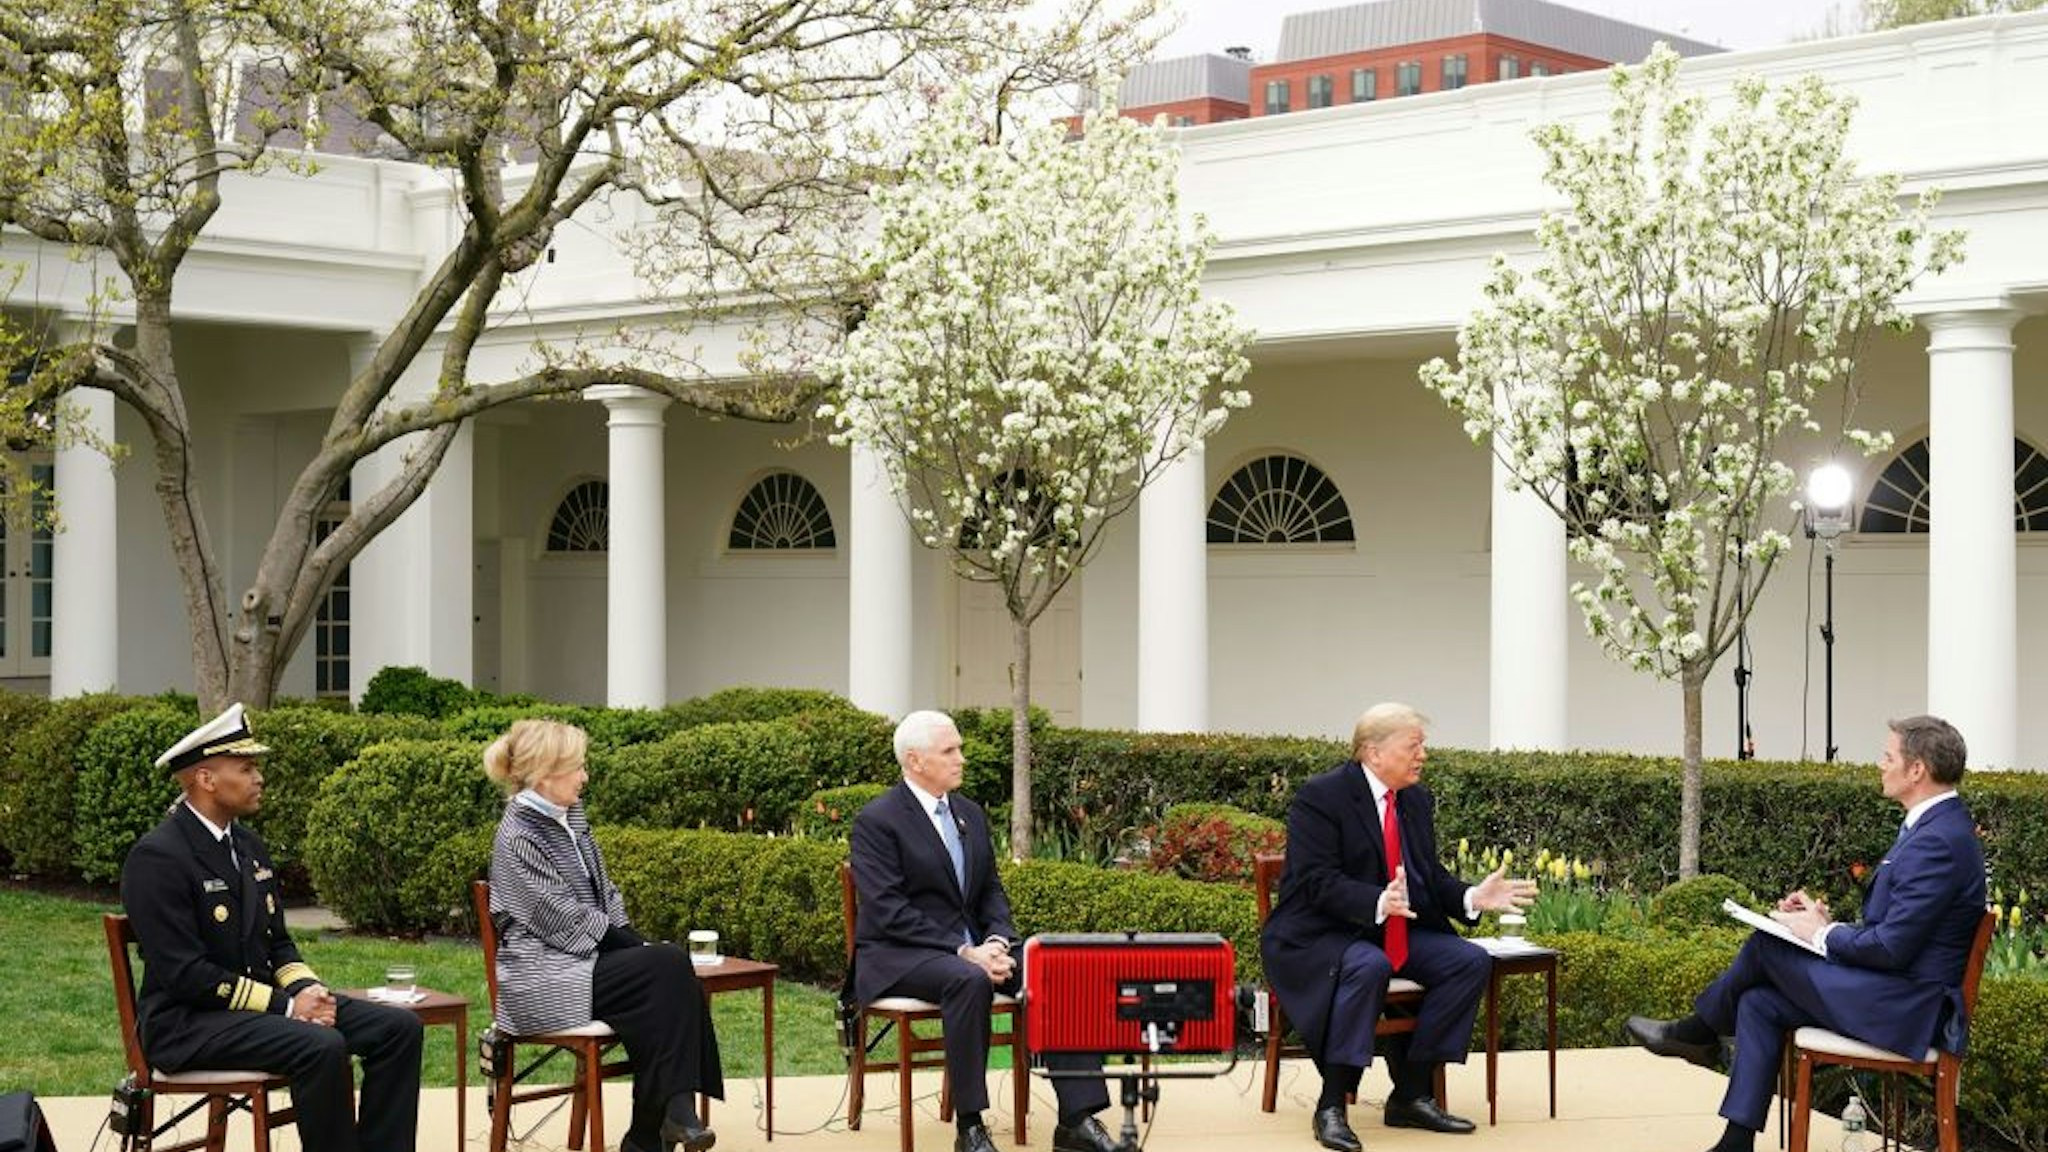 (L-R) US Surgeon General Jerome Adams, Response coordinator for White House Coronavirus Task Force Deborah Birx, US Vice President Mike Pence and President Donald Trump take part in a Fox News virtual town hall meeting with anchor Bill Hemmer, from the Rose Garden of the White House in Washington, DC, on March 24, 2020. (Photo by MANDEL NGAN / AFP) (Photo by